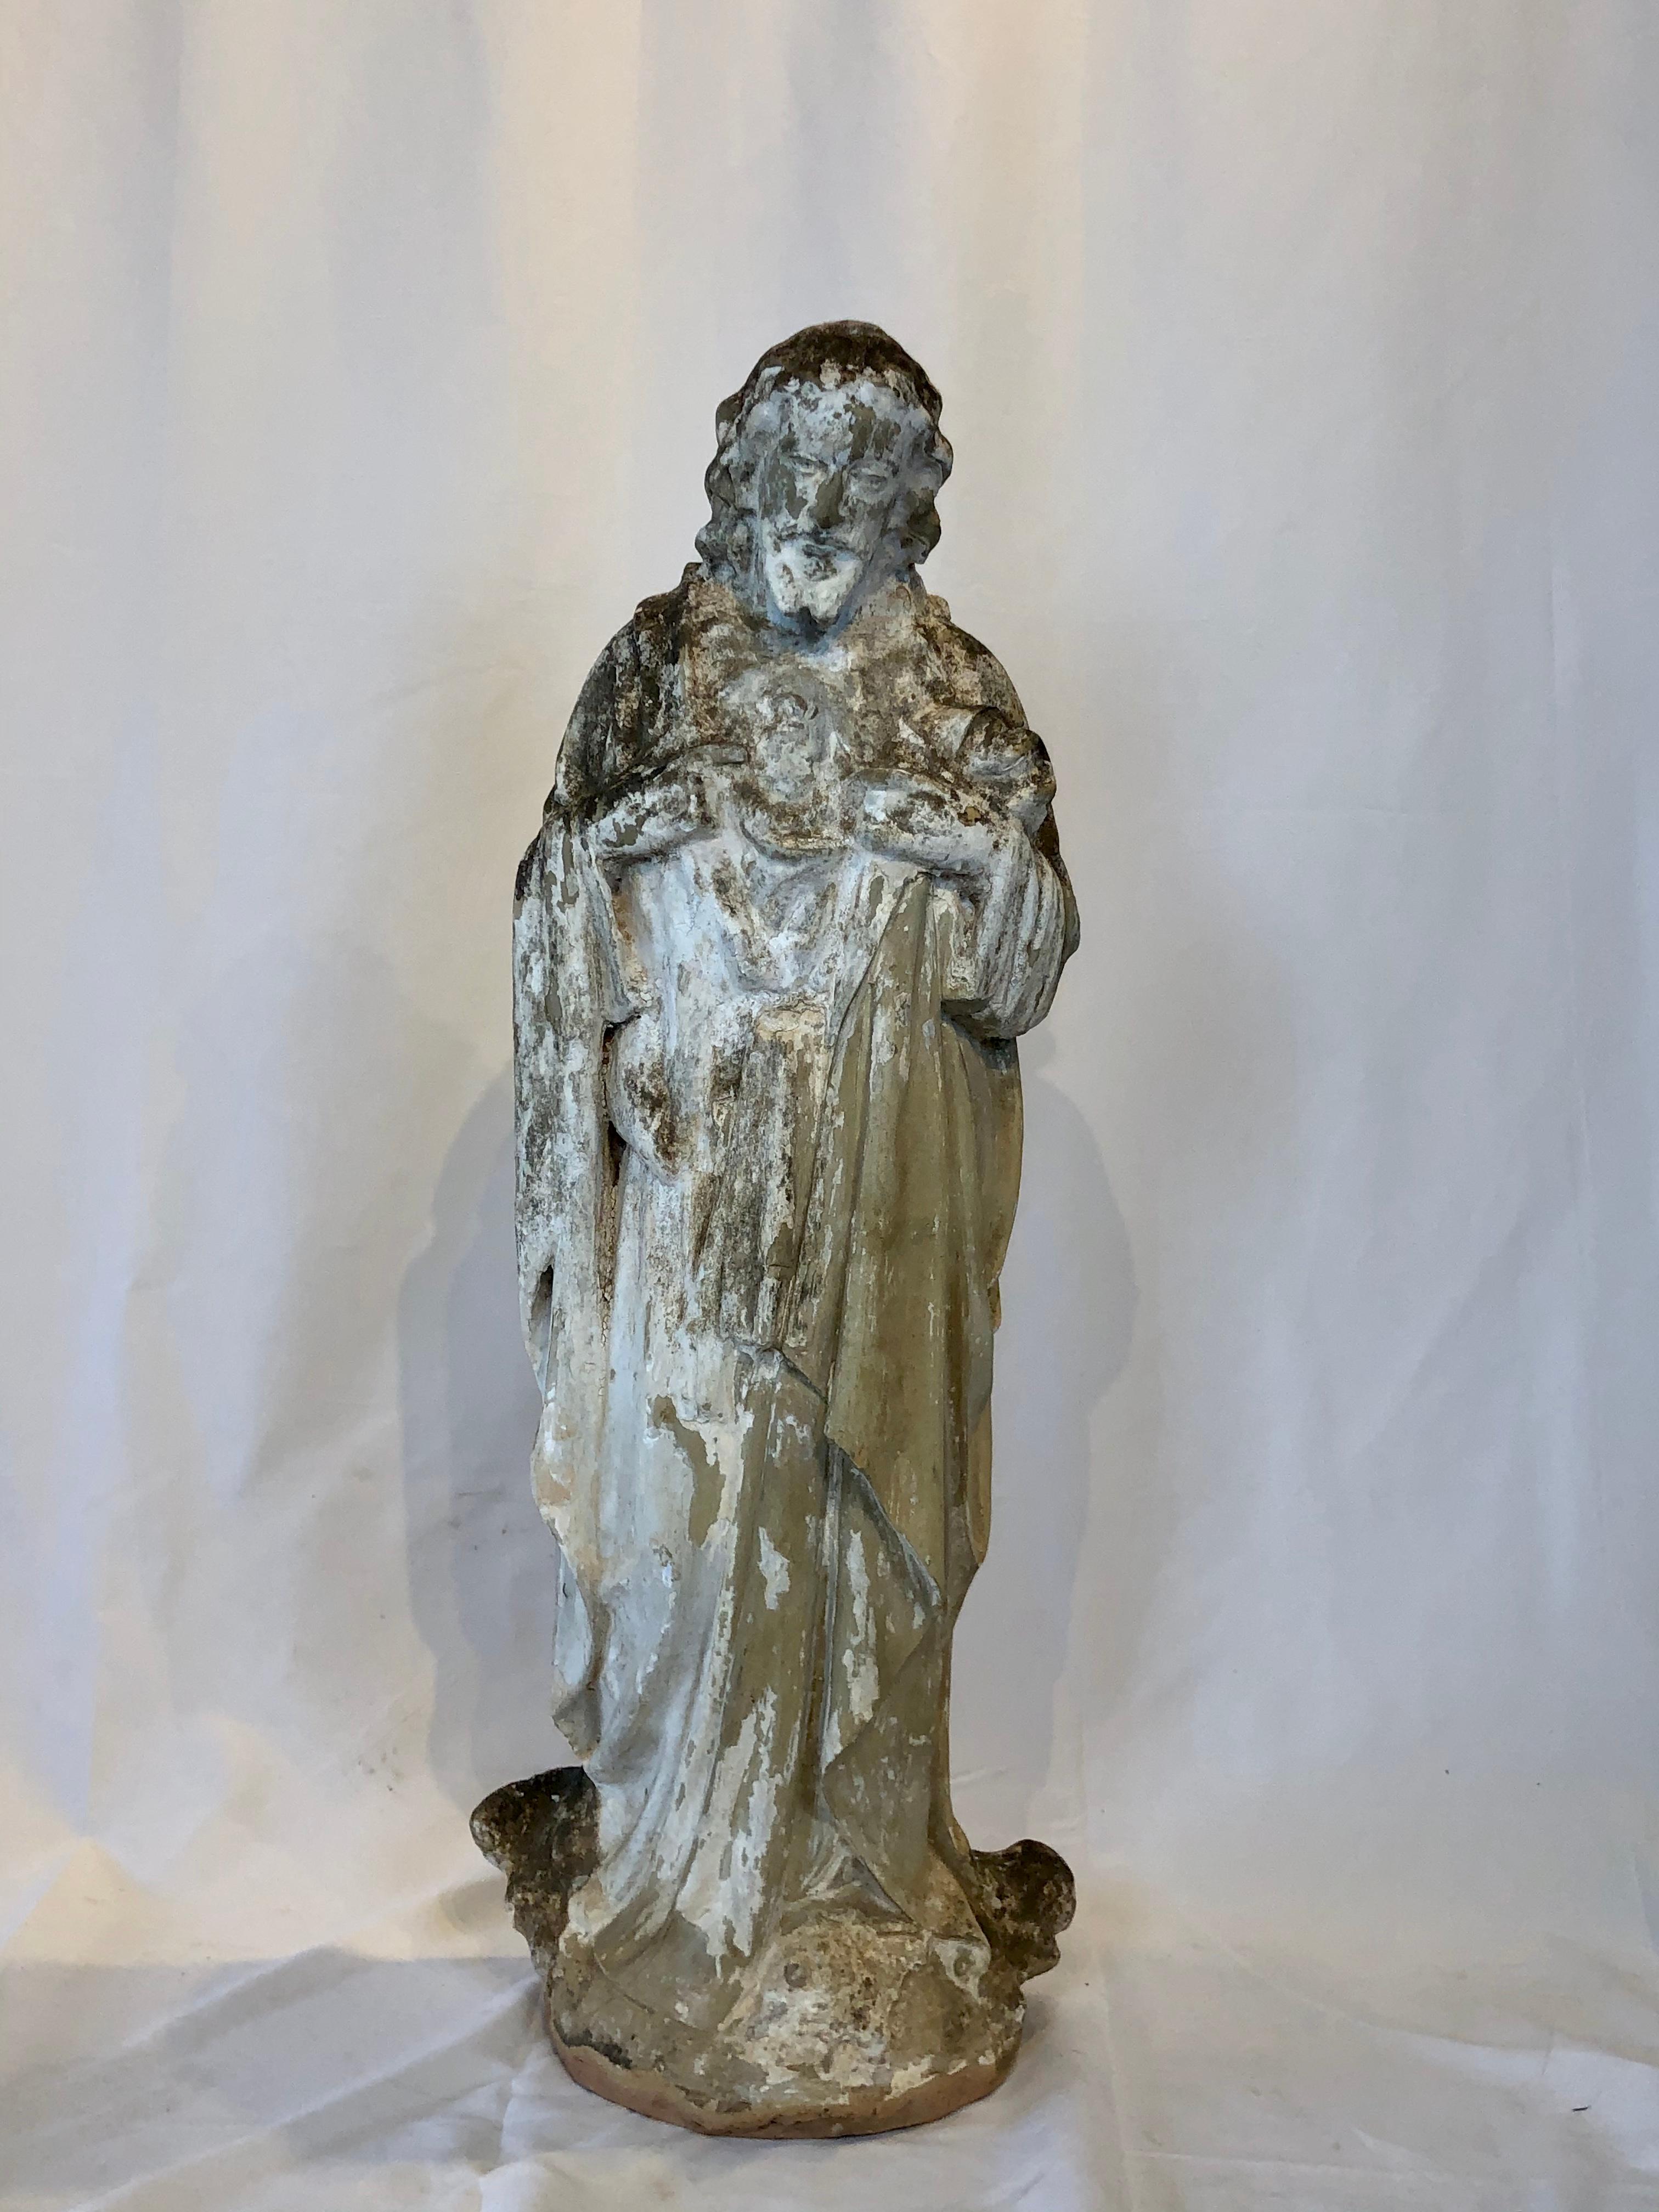 Found in France, this is a terracotta statue of The Sacred Heart of Jesus. We believe this statue was once used outside of a French church. The paint has worn leaving a wonderful aged patina. This beautiful statue could be used in your home or